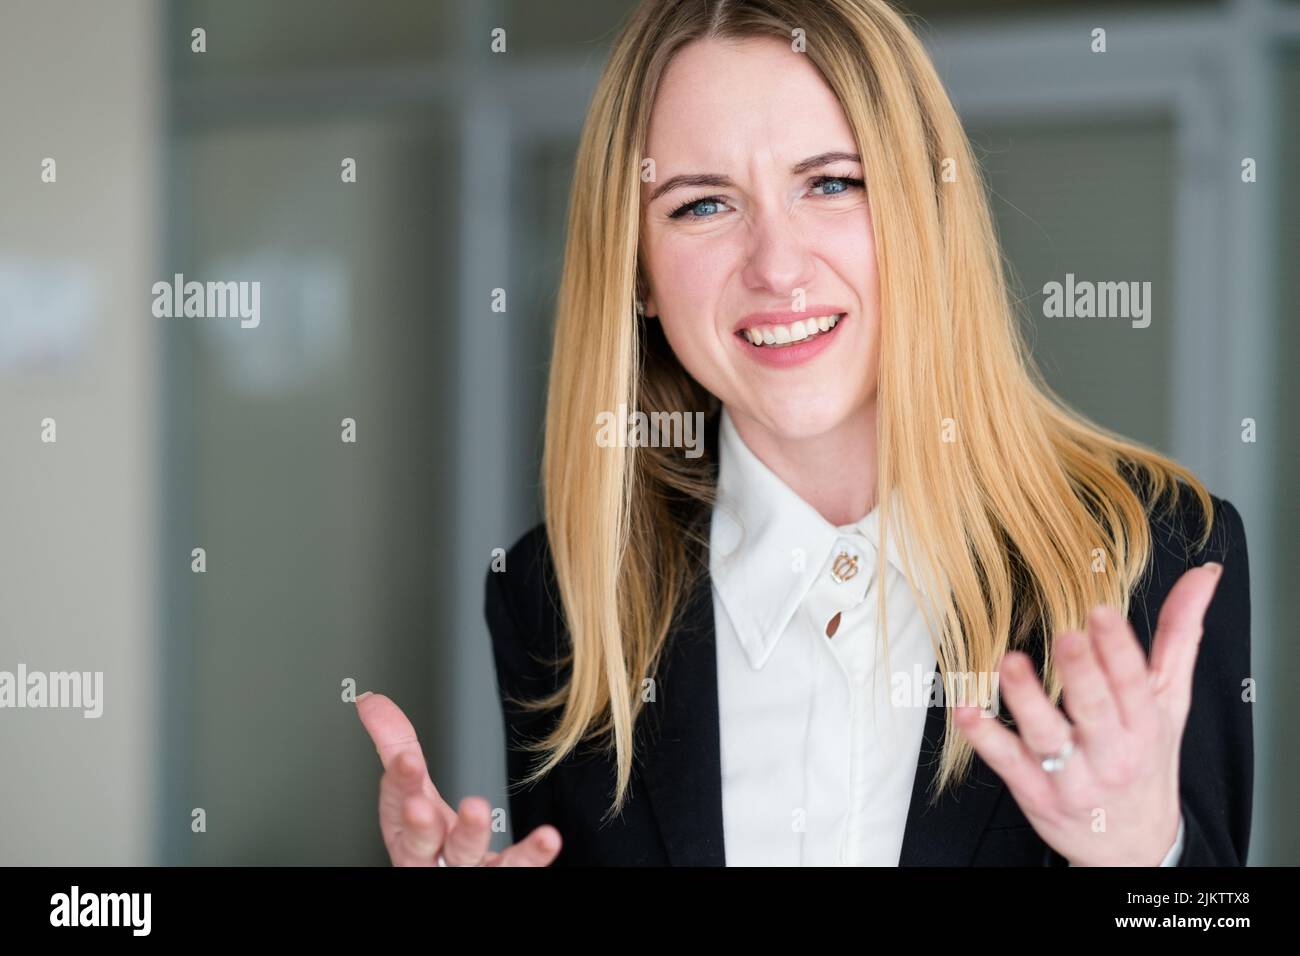 emotion dumbfounded bewildered astounded woman Stock Photo